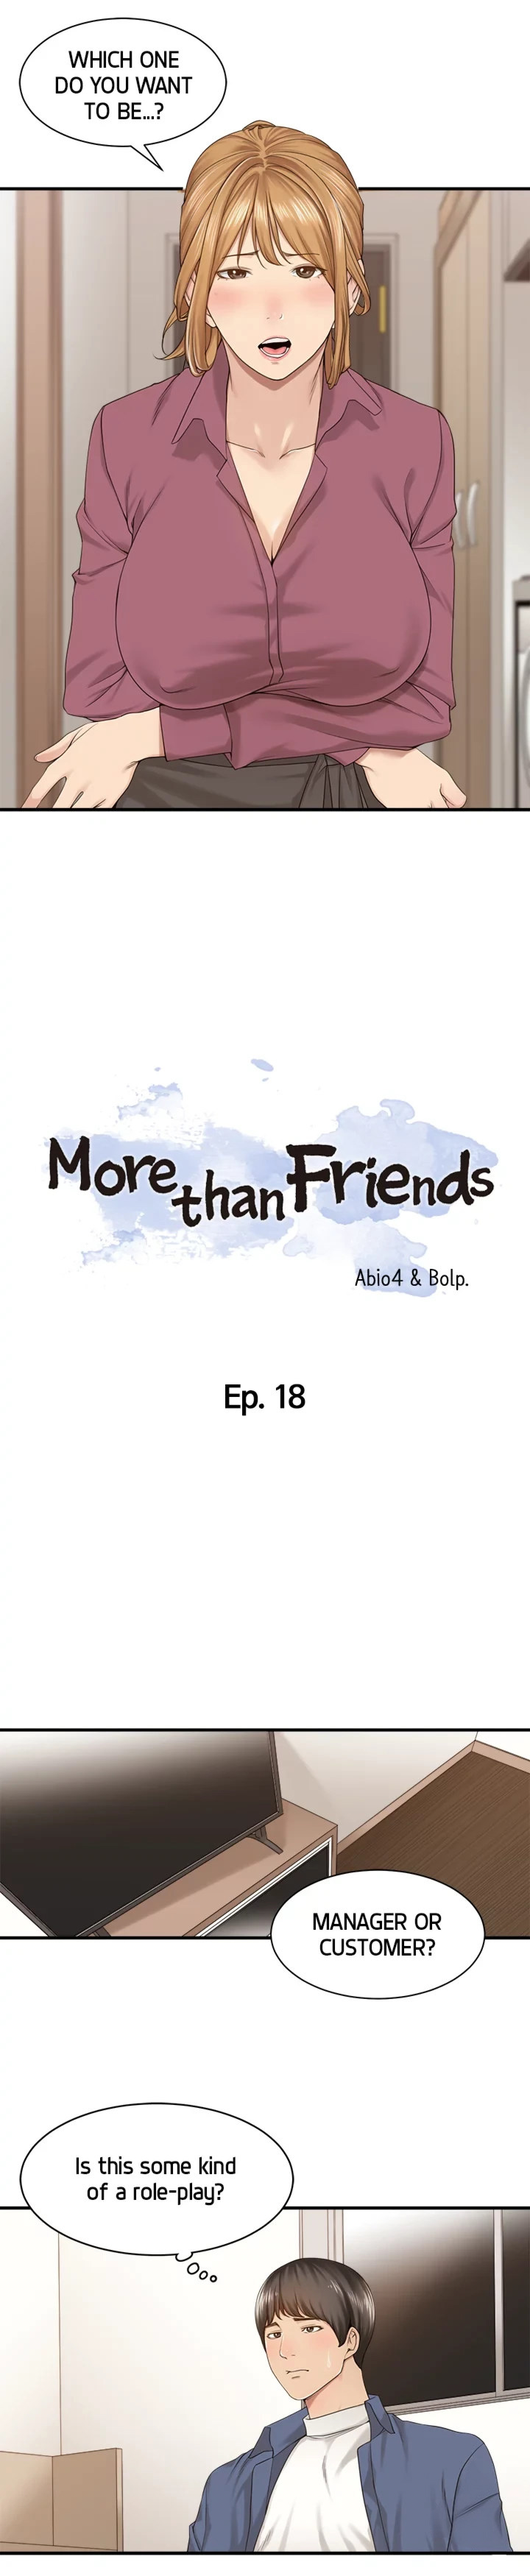 More Than Friends image